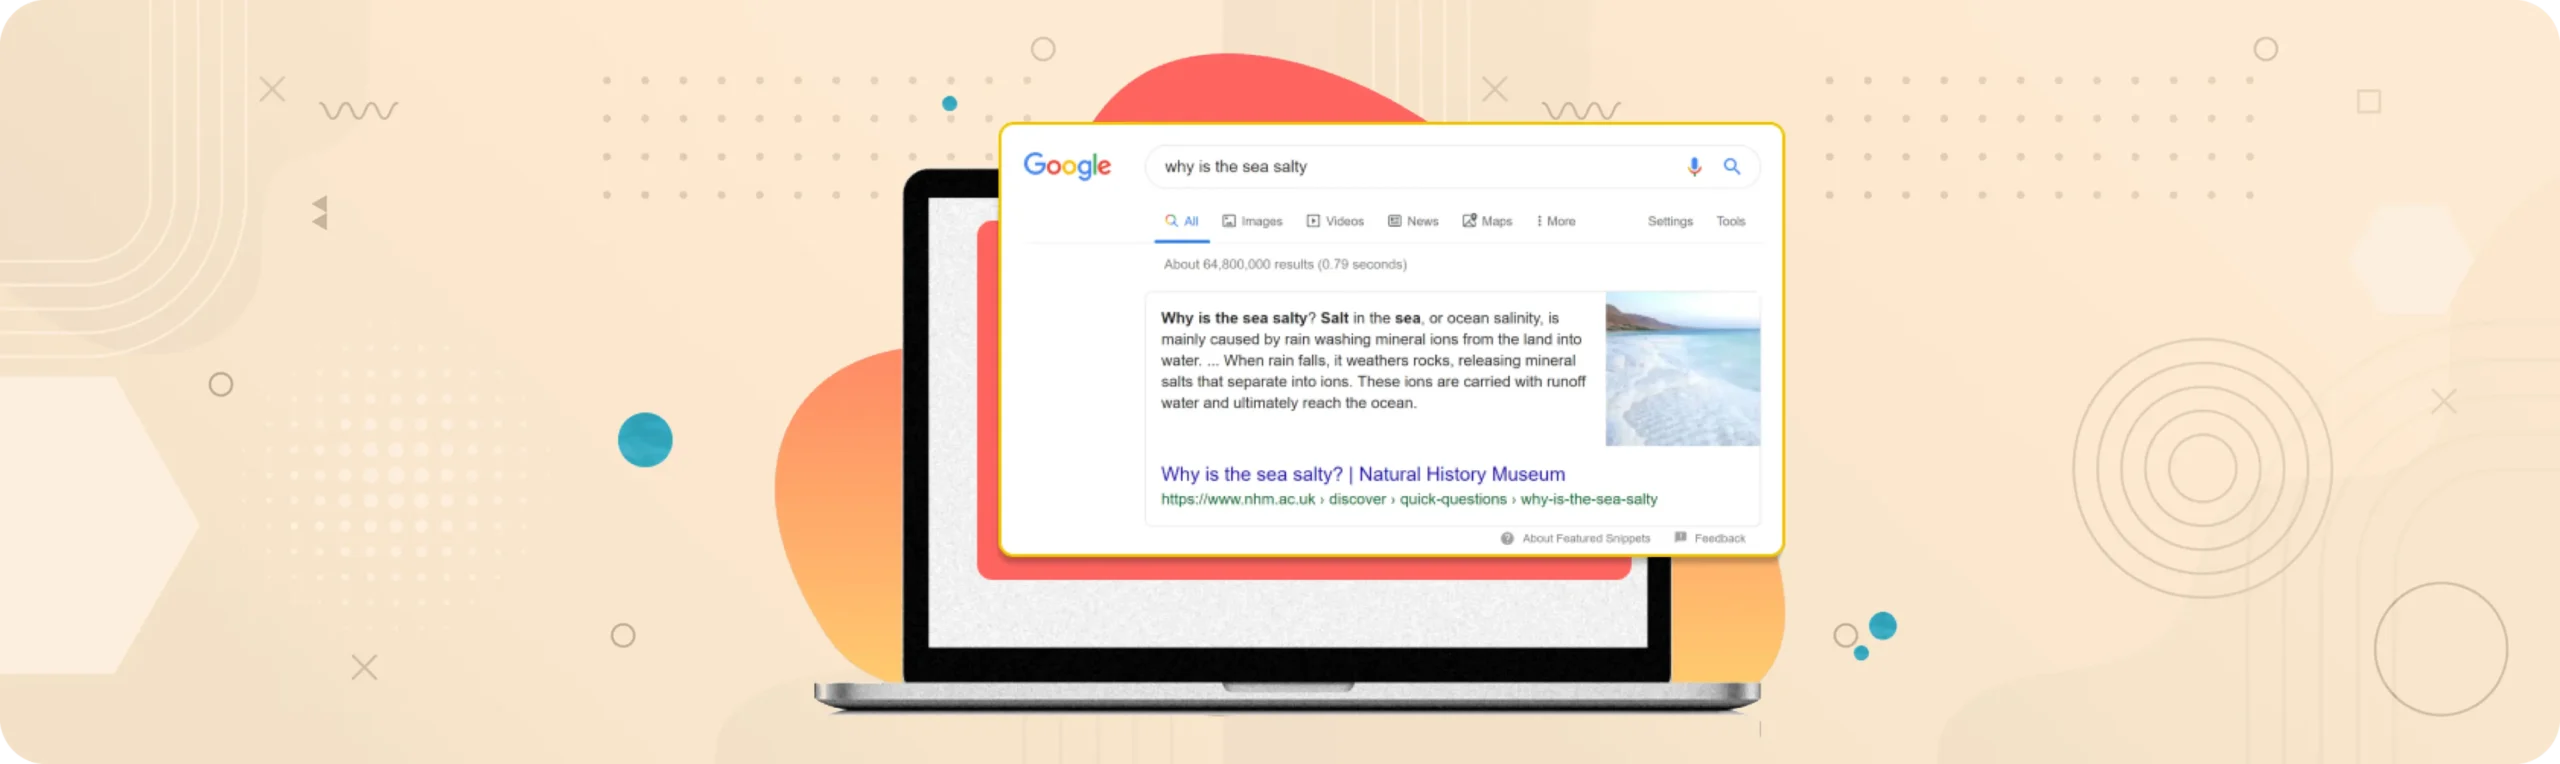 Featured snippets   